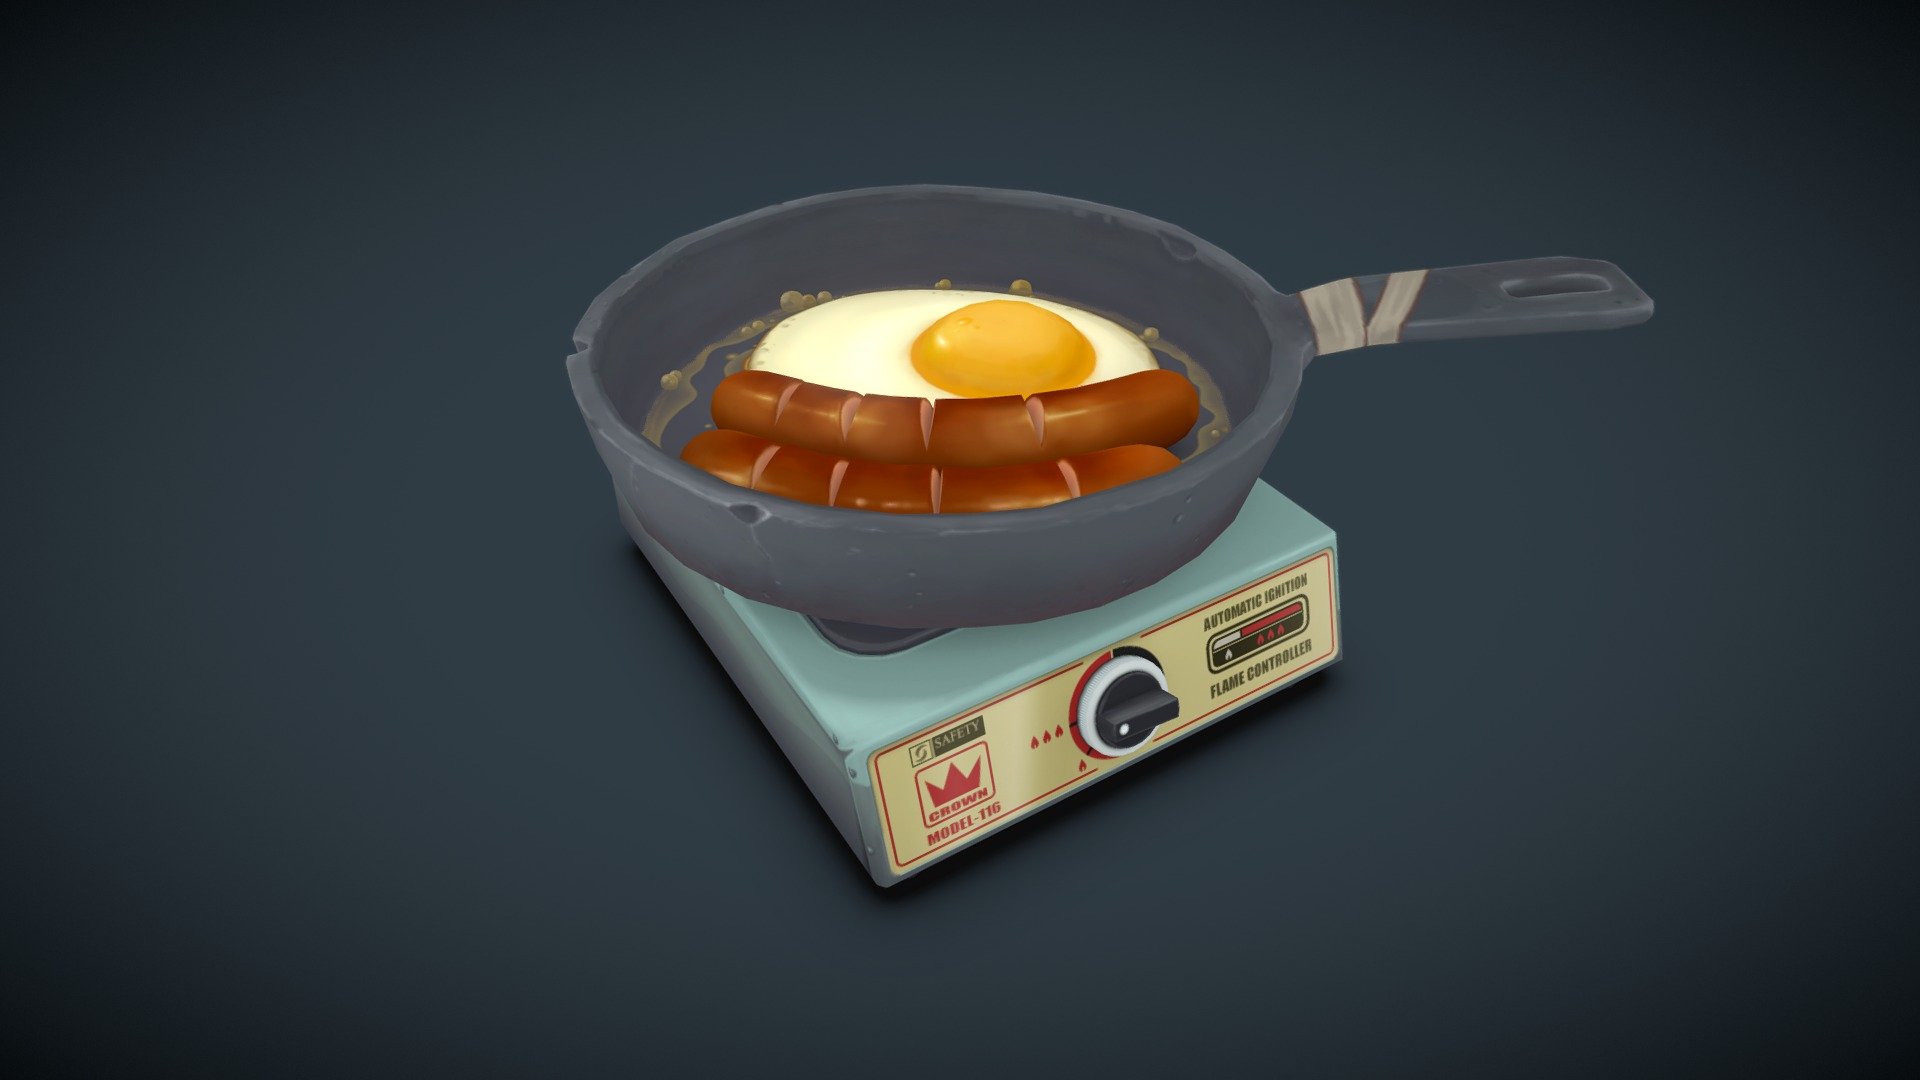 That's my first try to make a delicious meal.
A huge thanks to Betty Jiang, her artwork inspired me to this project.
This is my first experience in animation as well.
https://www.artstation.com/artwork/VXXN5 - Egg Jiggle - 3D model by Nikita [shacr0w] Vorobyev (@shacr0w) 3d model